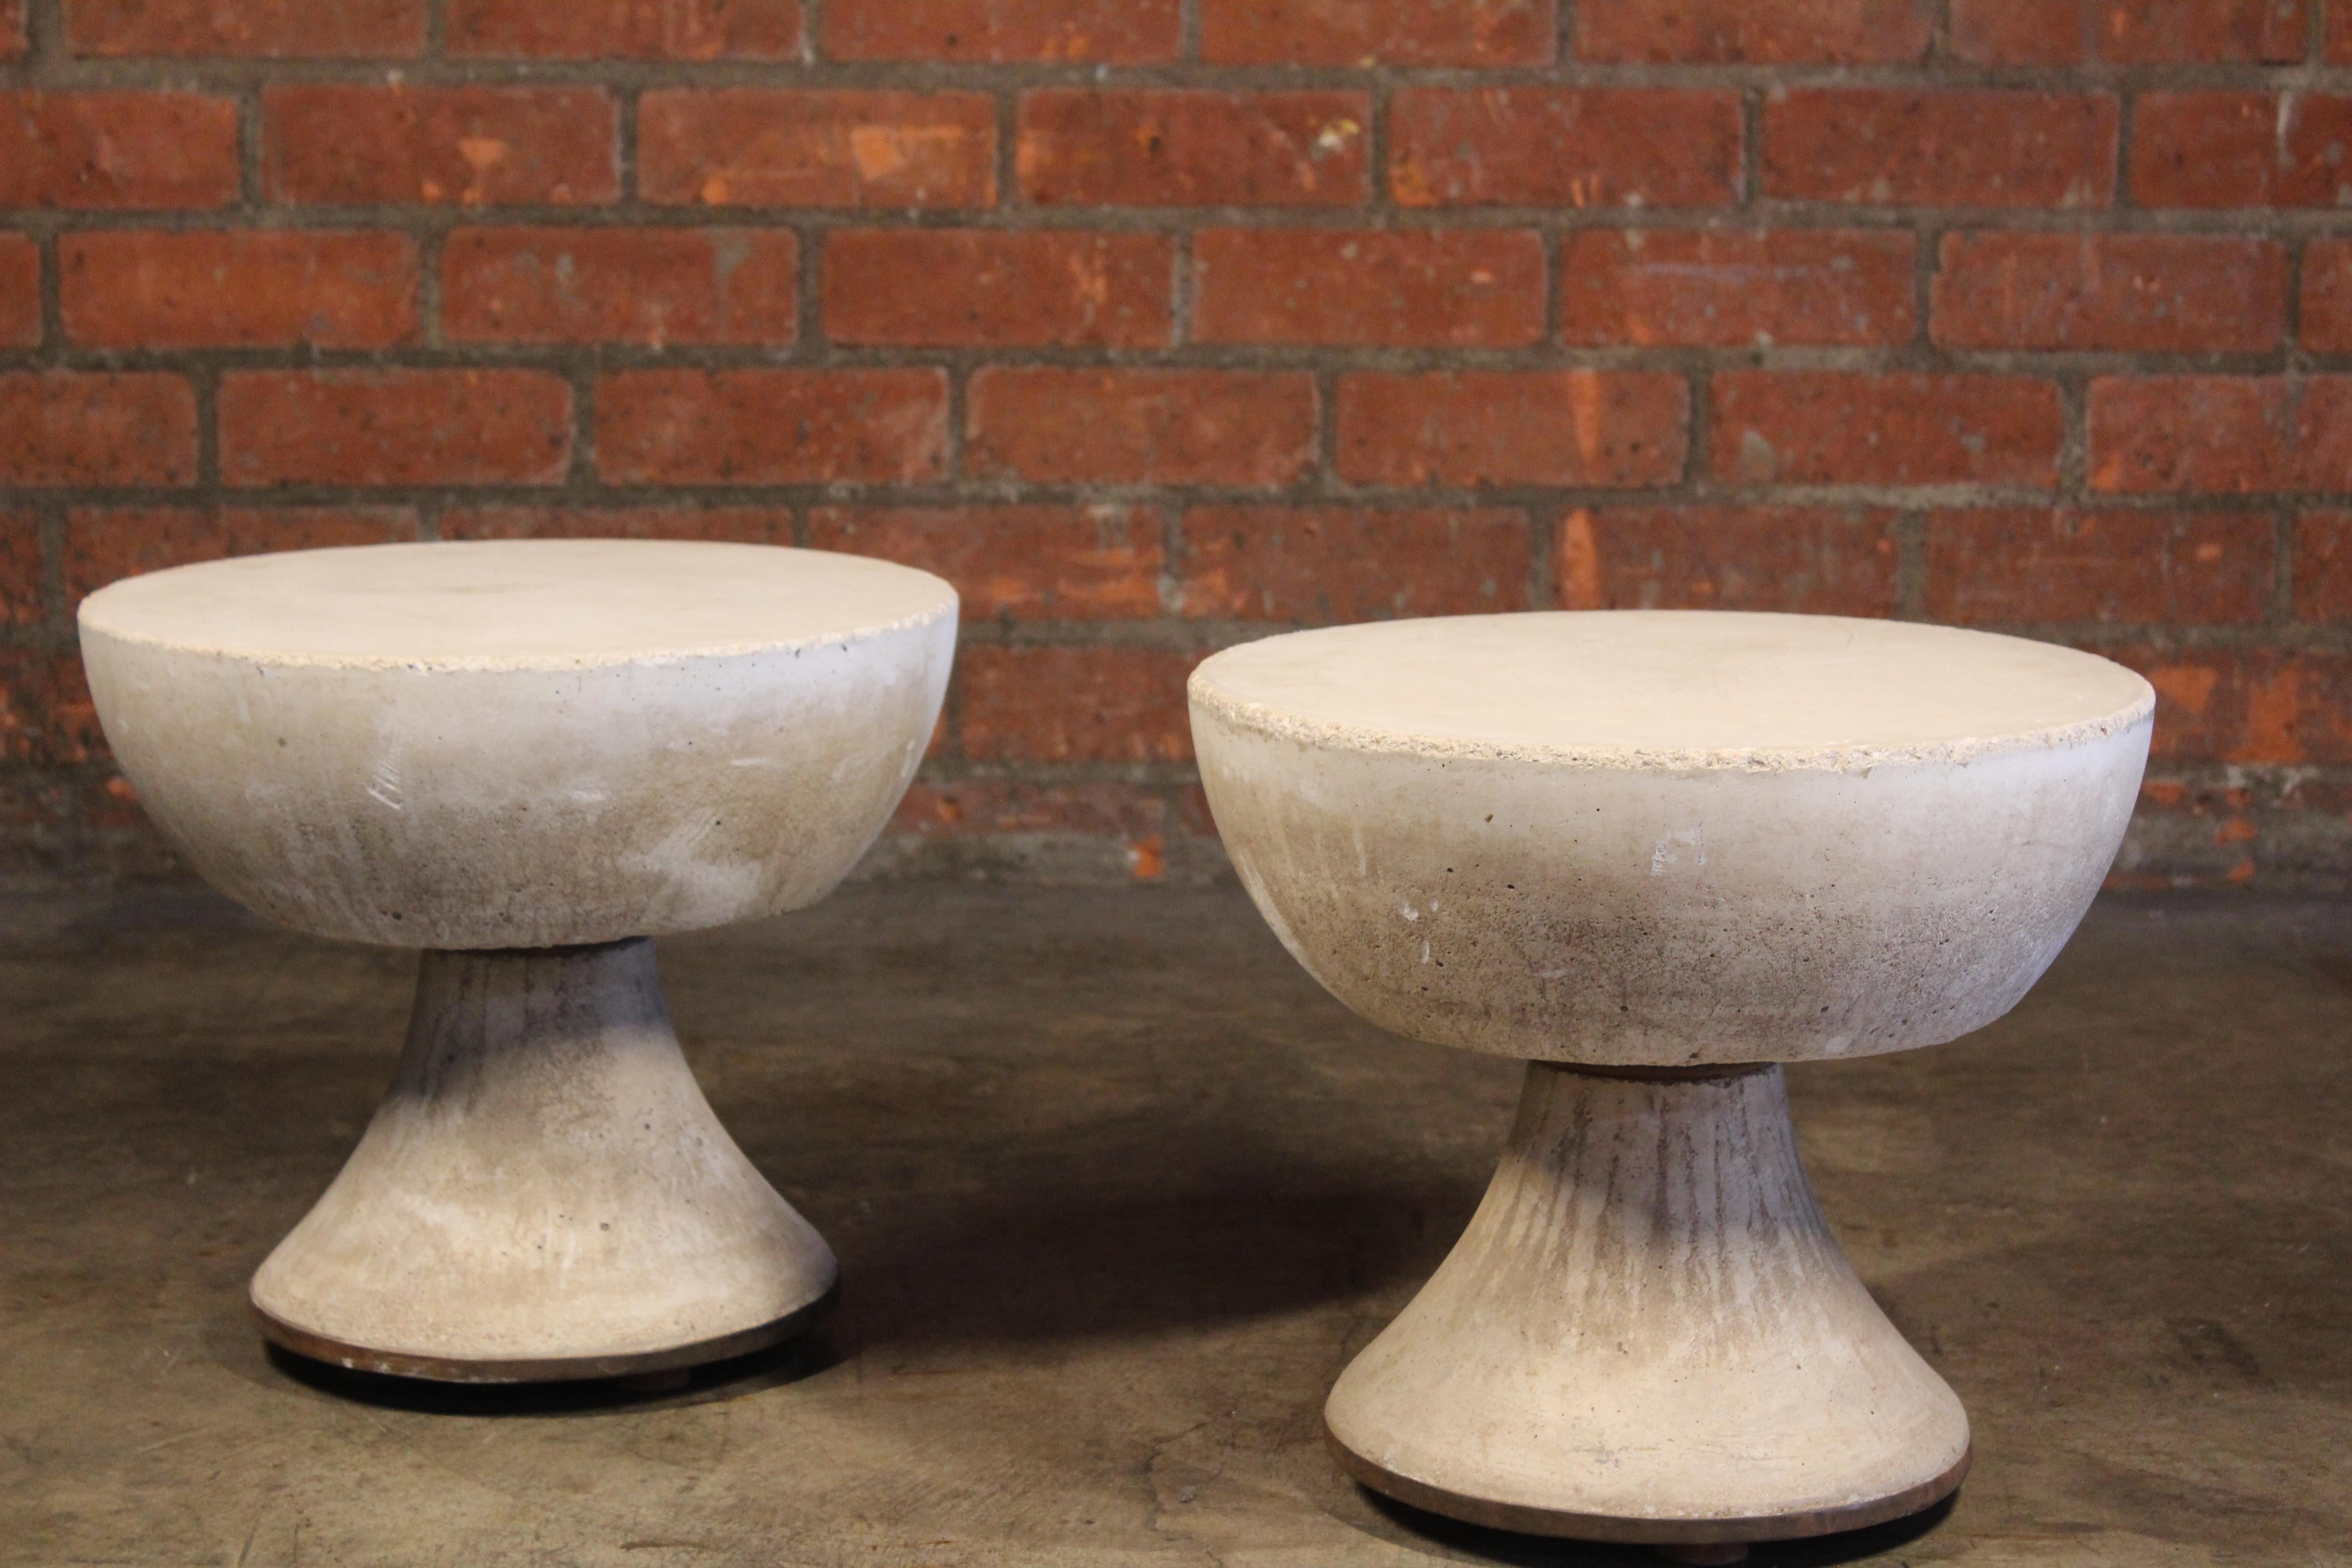 Pair of cast-concrete side tables from France, 1960s. These heavy durable tables are suitable for indoor or outdoor use. Made of cast concrete with steel feet and a brass detailed bottom edge. Sold as a pair.